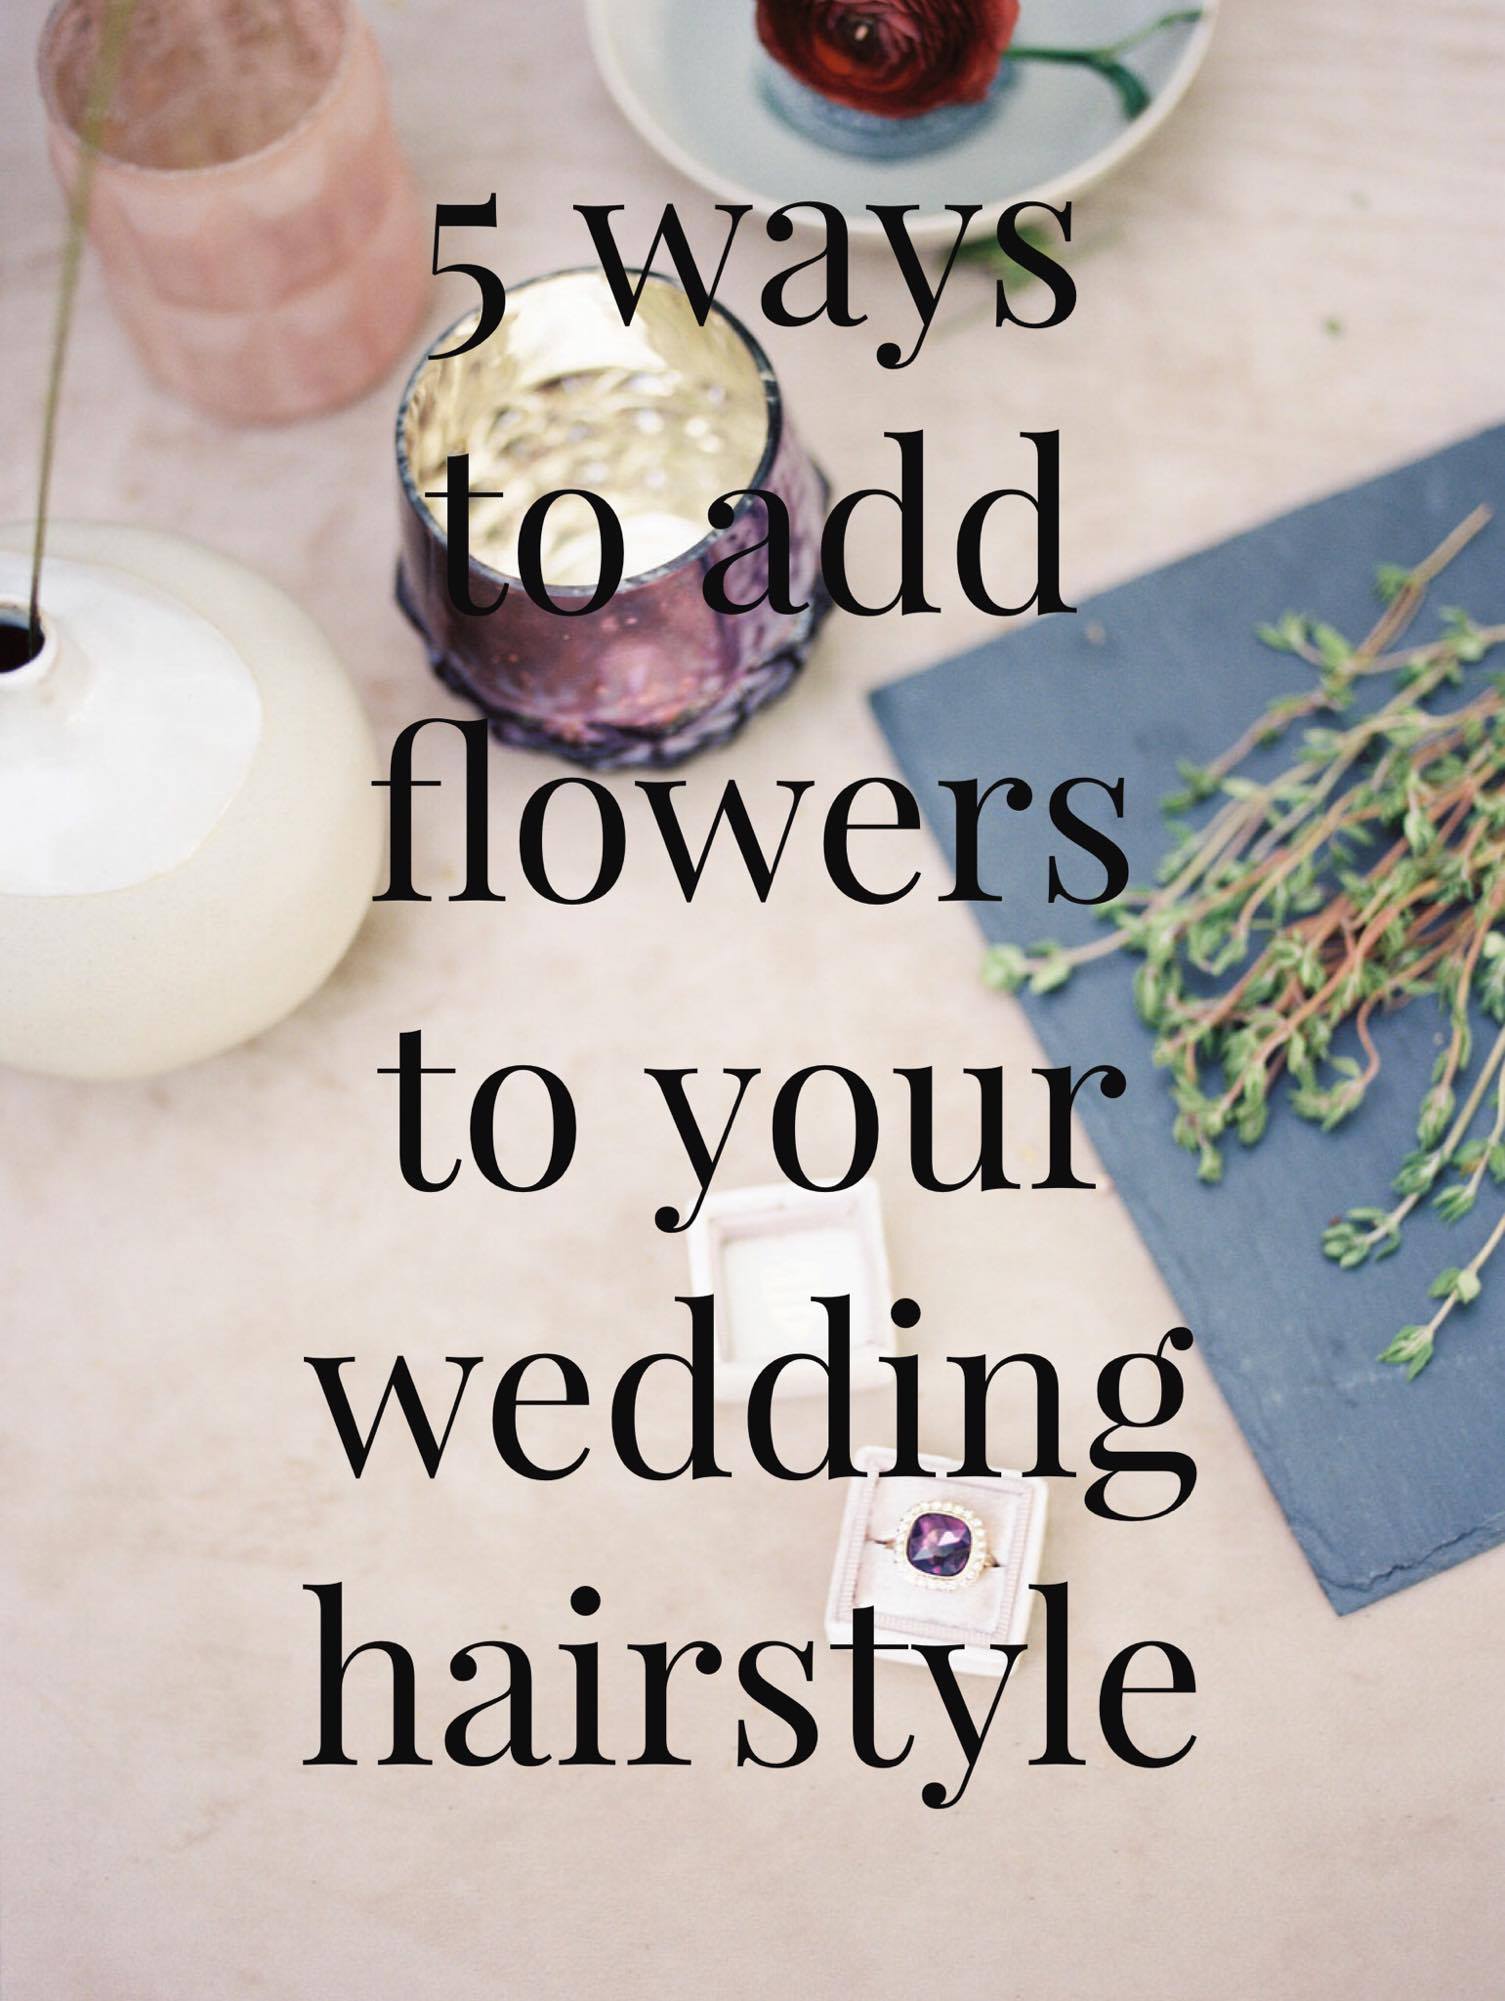 5 Ways to Add Florals to Your Wedding Hairstyle